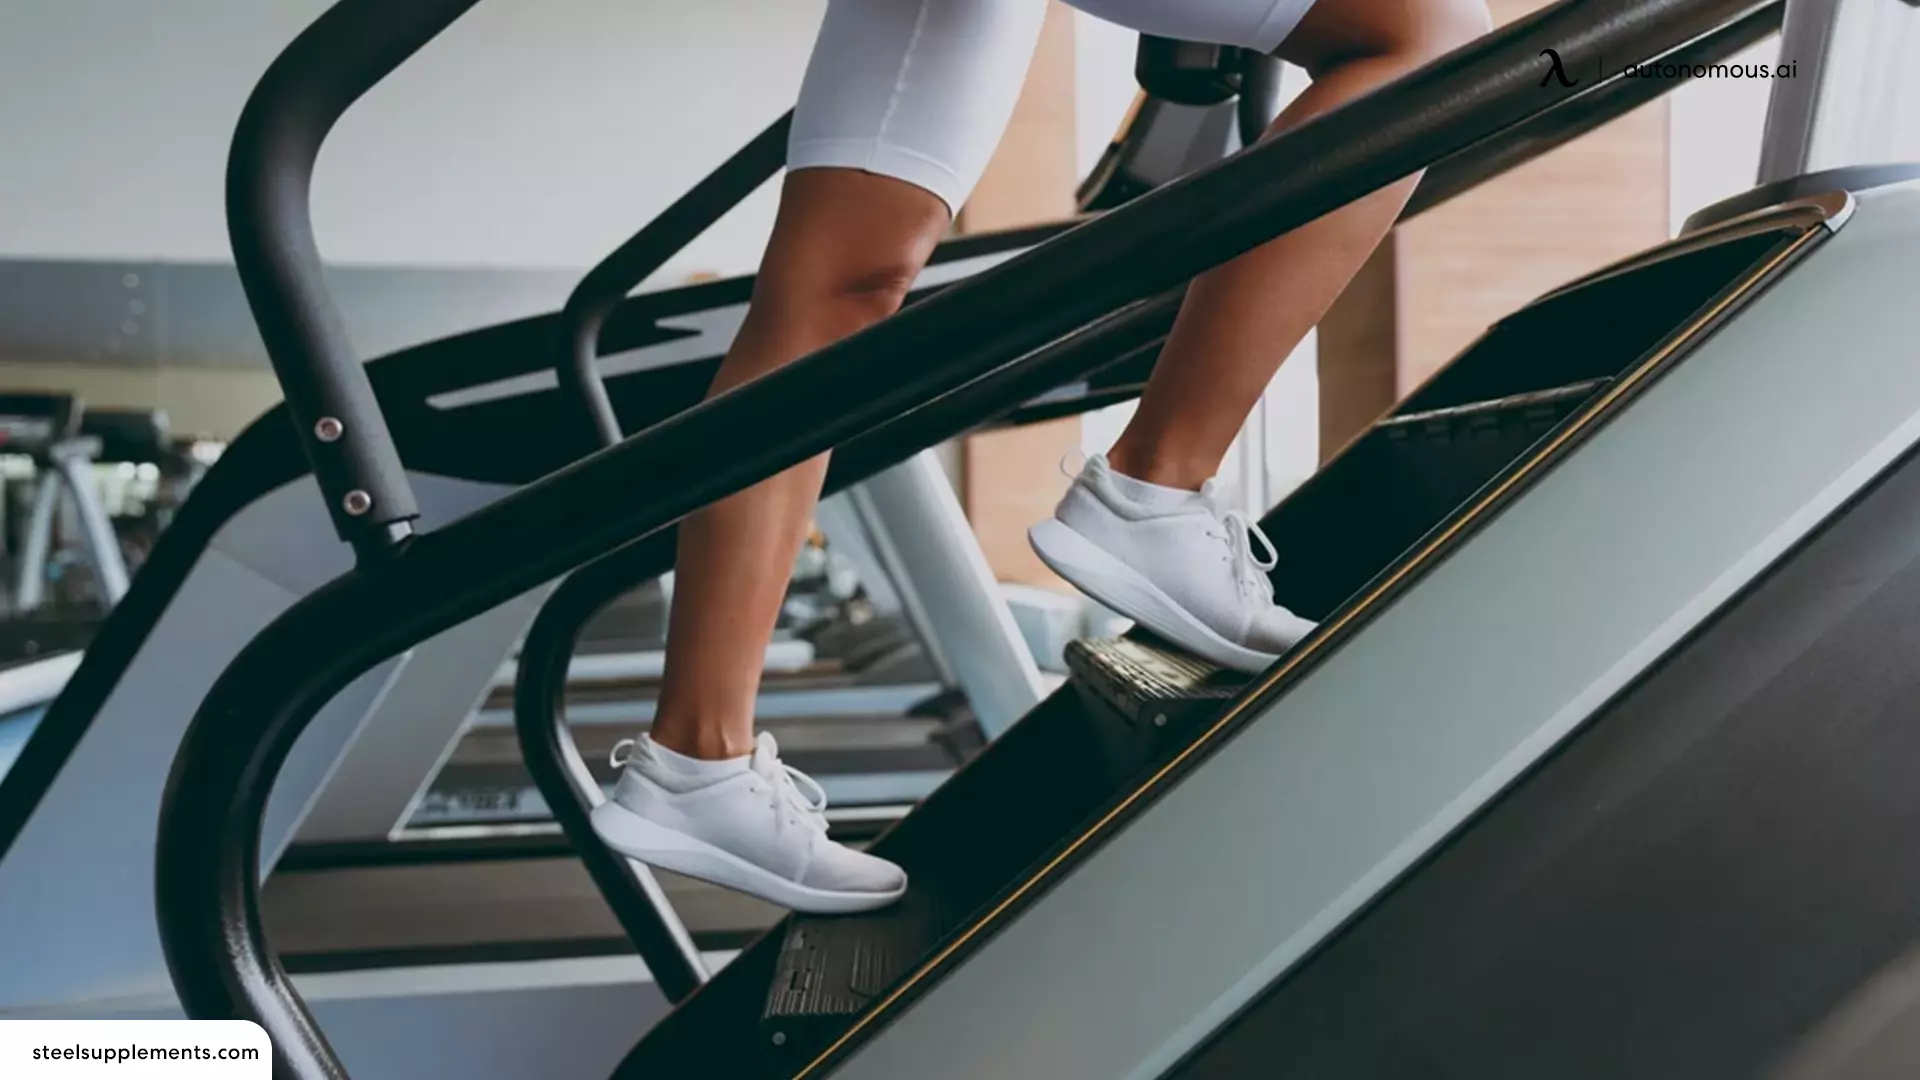 What is a Stairmaster?